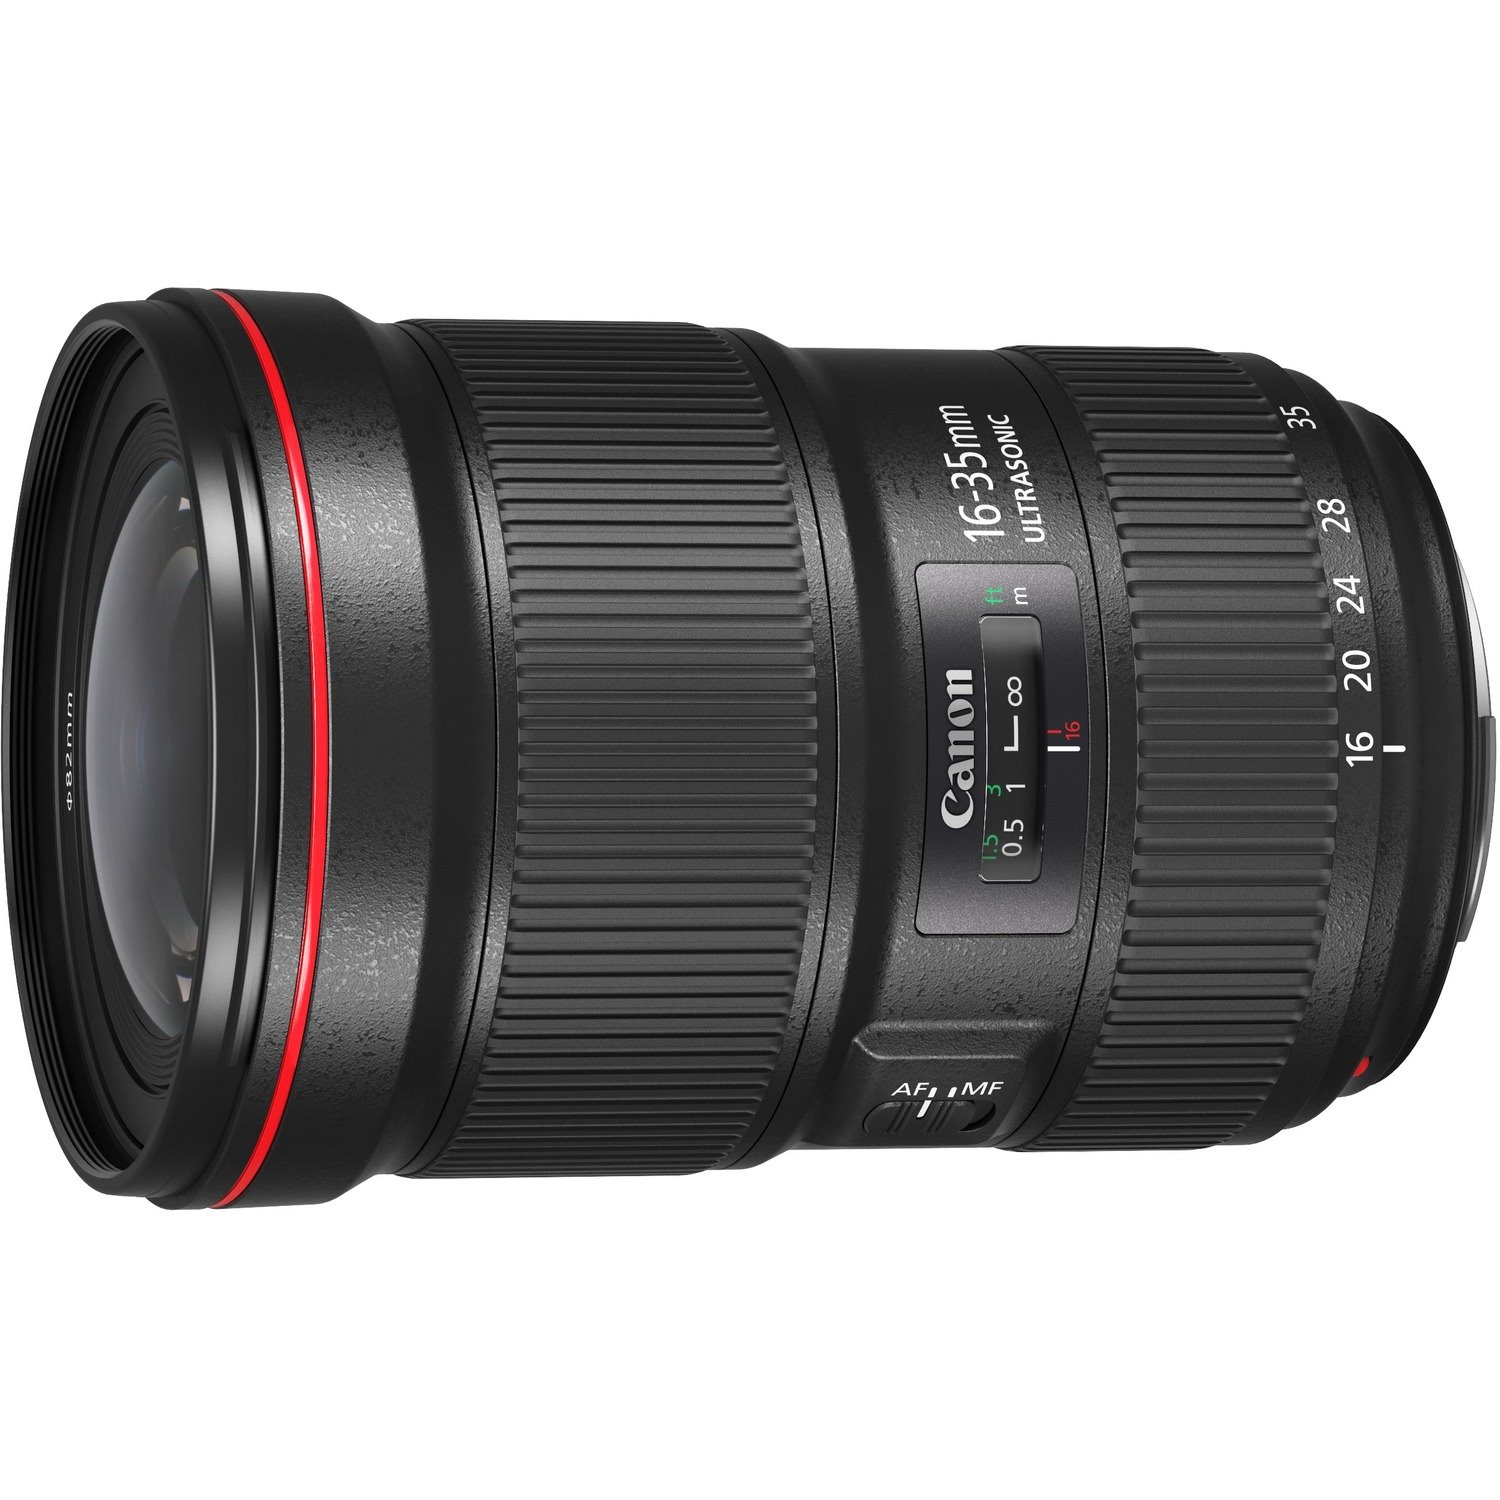 Canon - 16 mm to 35 mm - f/2.8 - Ultra Wide Angle Zoom Lens for Canon EF